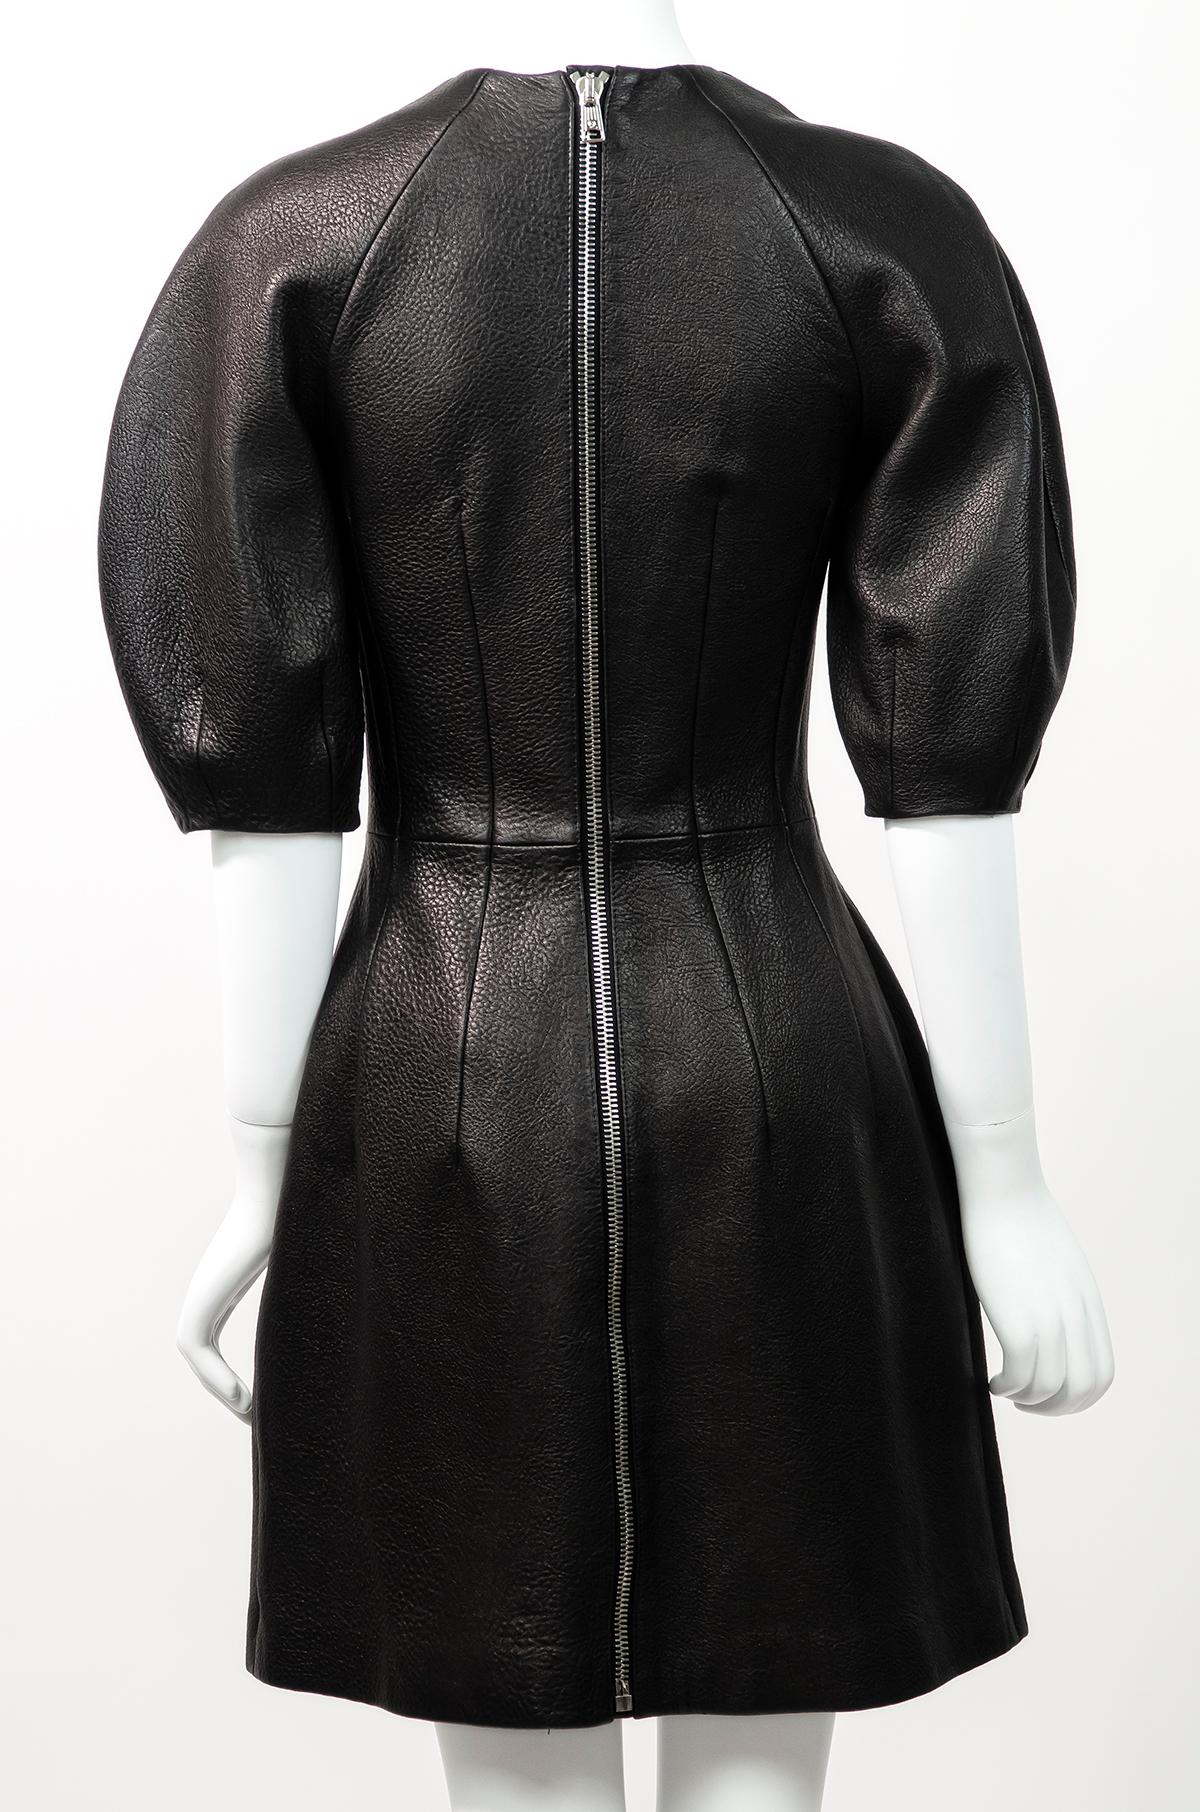 ALEXANDER MCQUEEN Textured Leather Bubble Dress In Excellent Condition For Sale In Berlin, BE